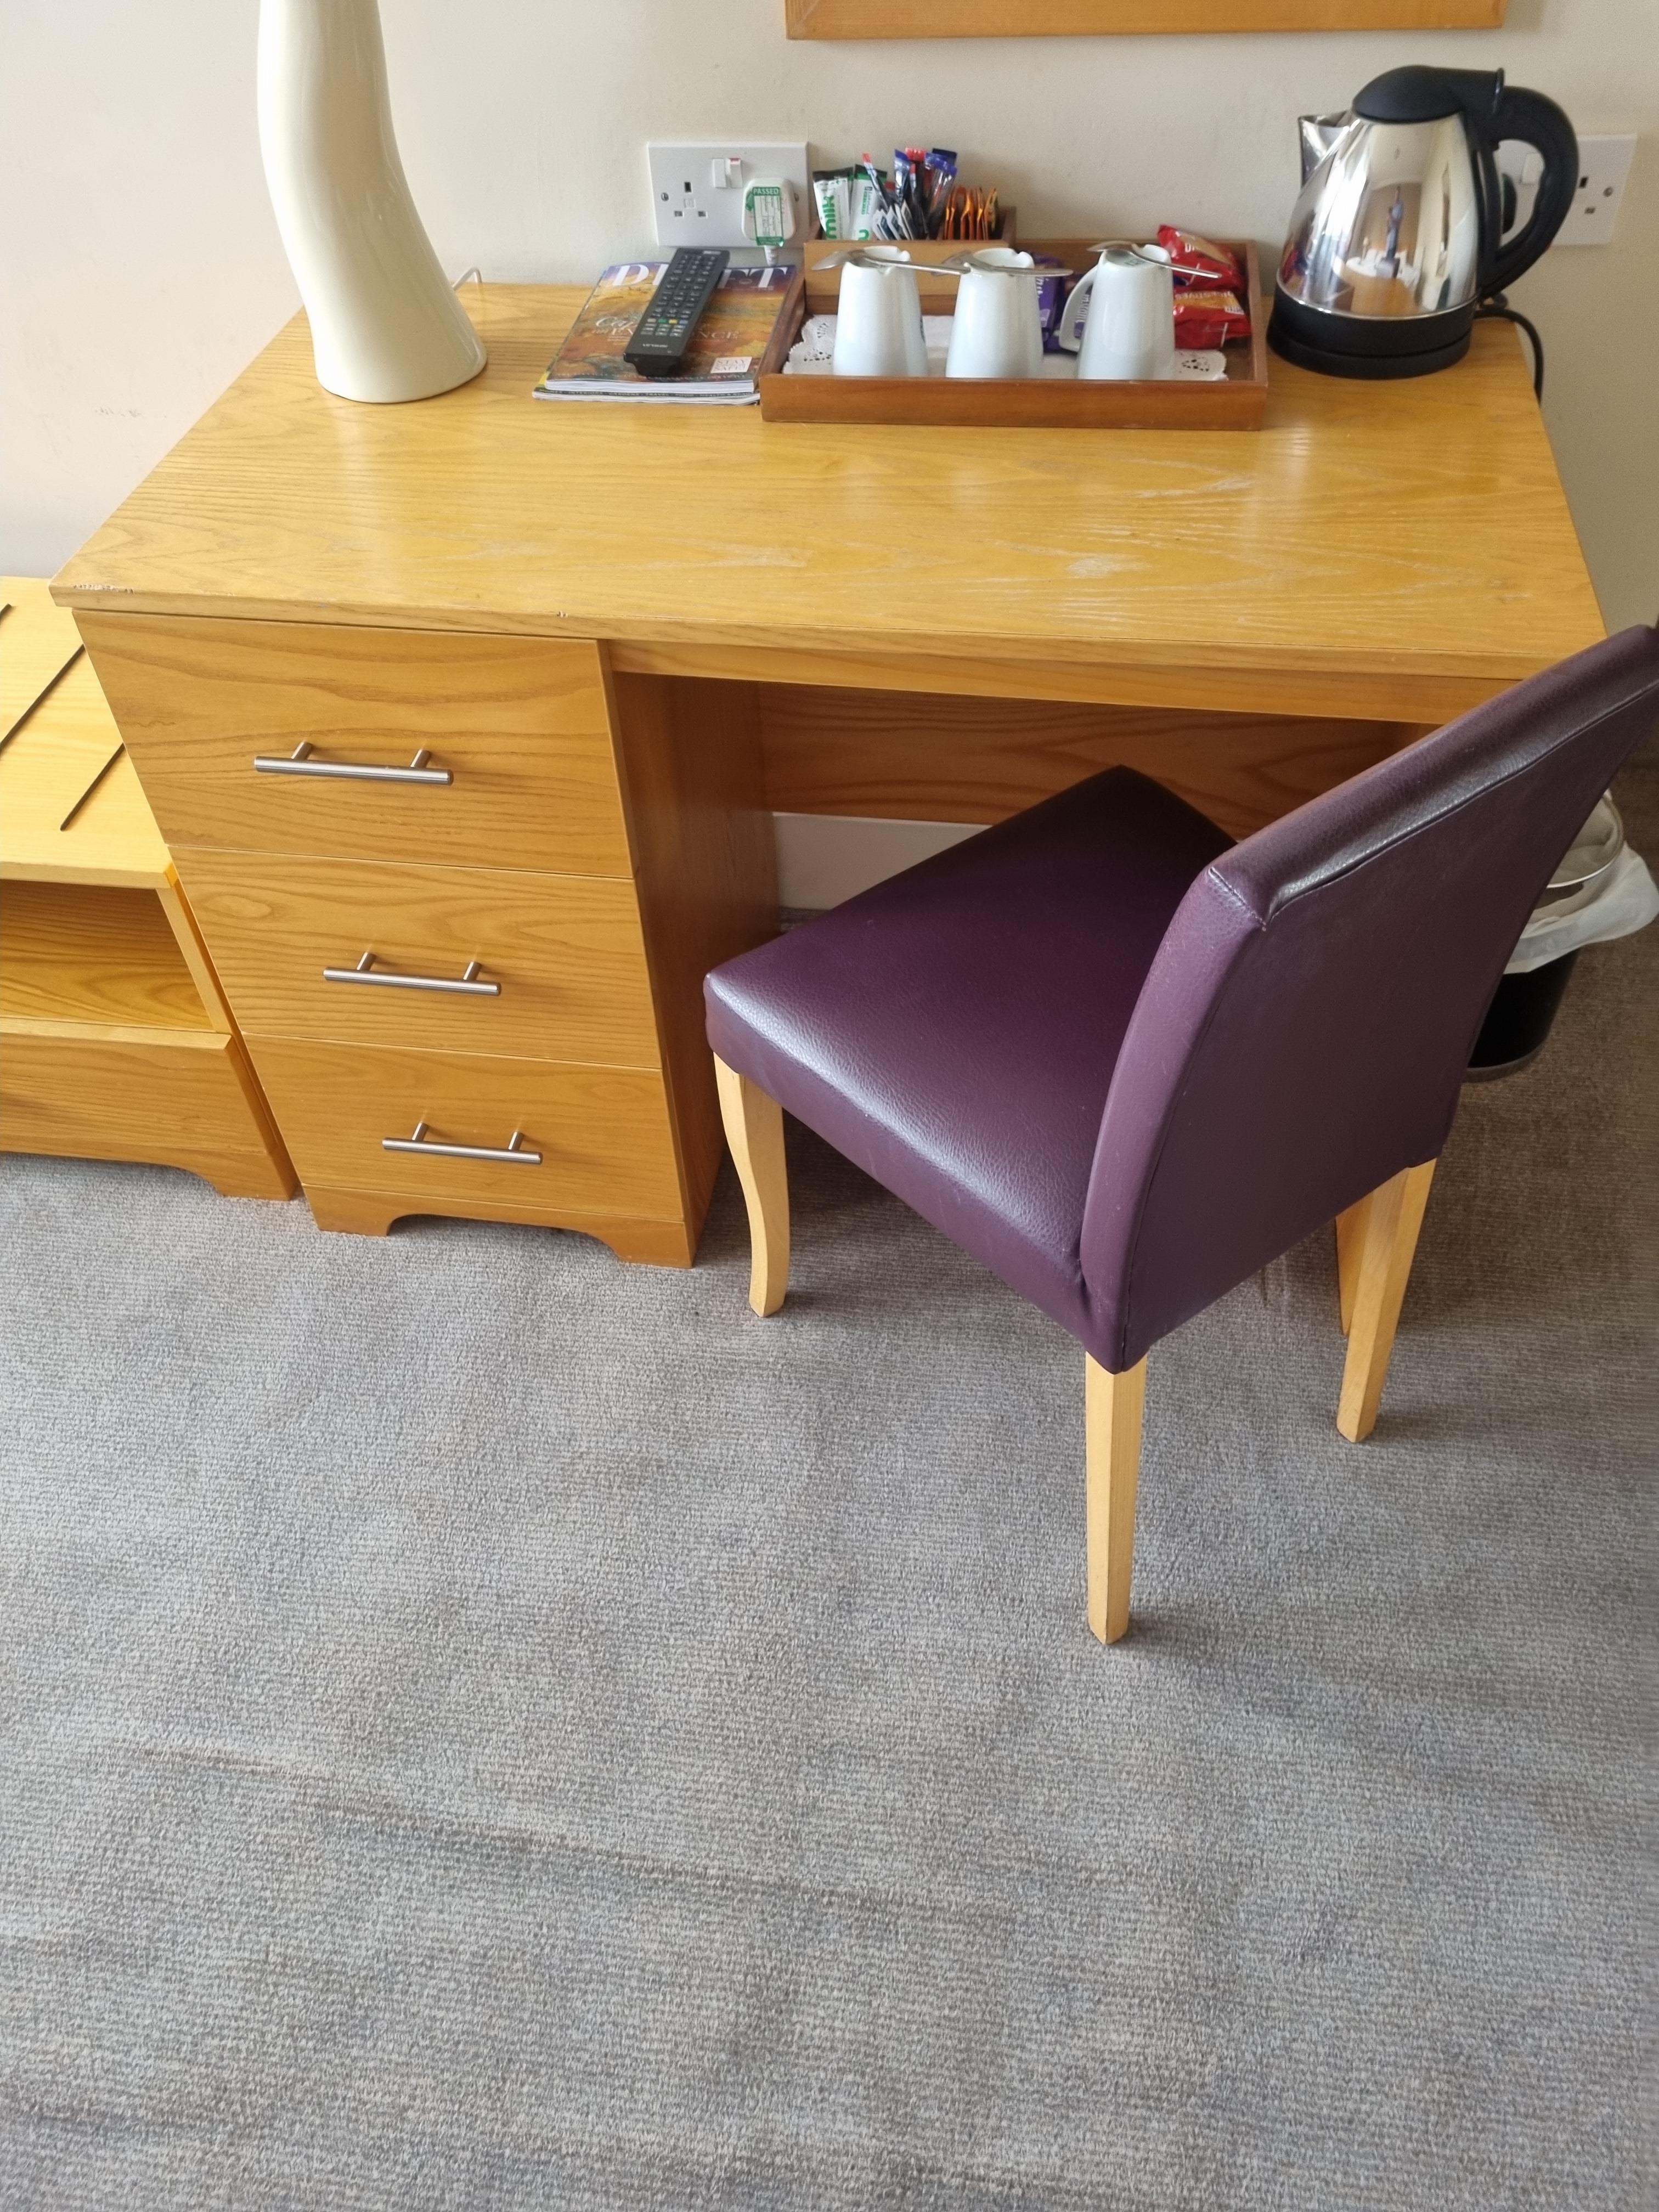 Pine Desk With 3 Drawers And Side Chair With Purple Upholstered Chair 1100 Mm X D 720 Mm H 750mm ( - Image 2 of 2